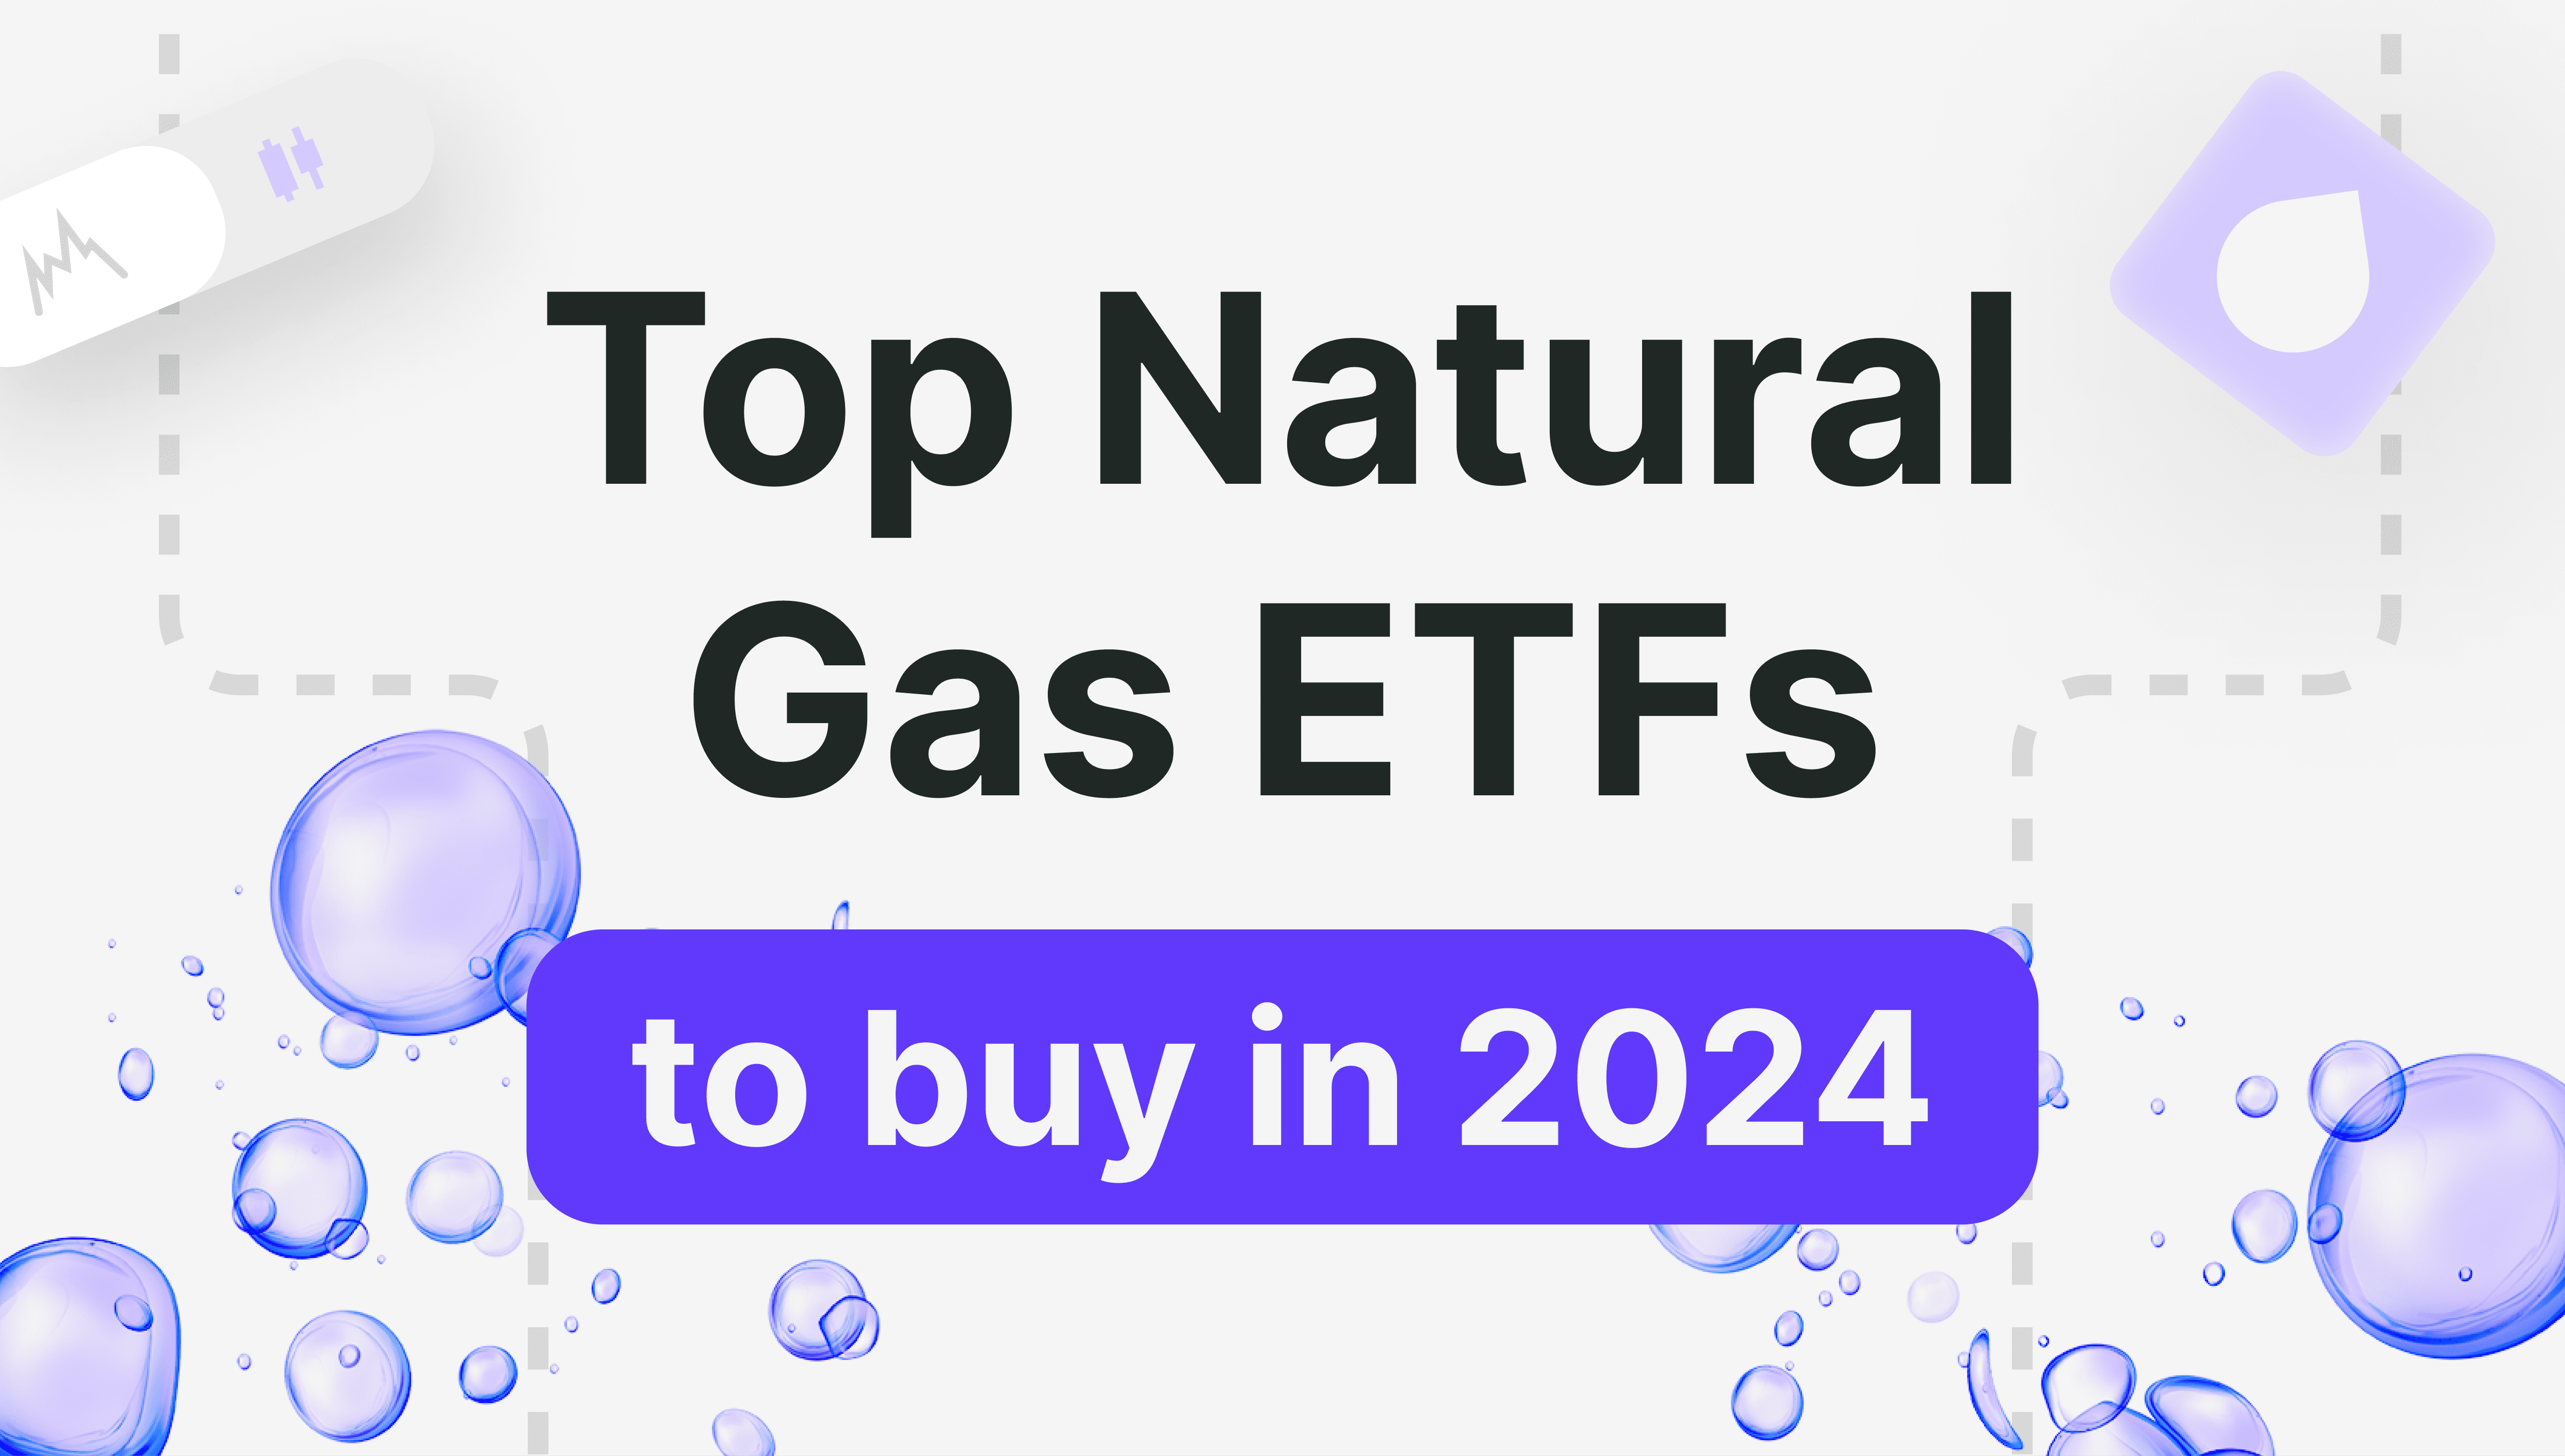 Top Natural Gas ETFs To Buy In 2024